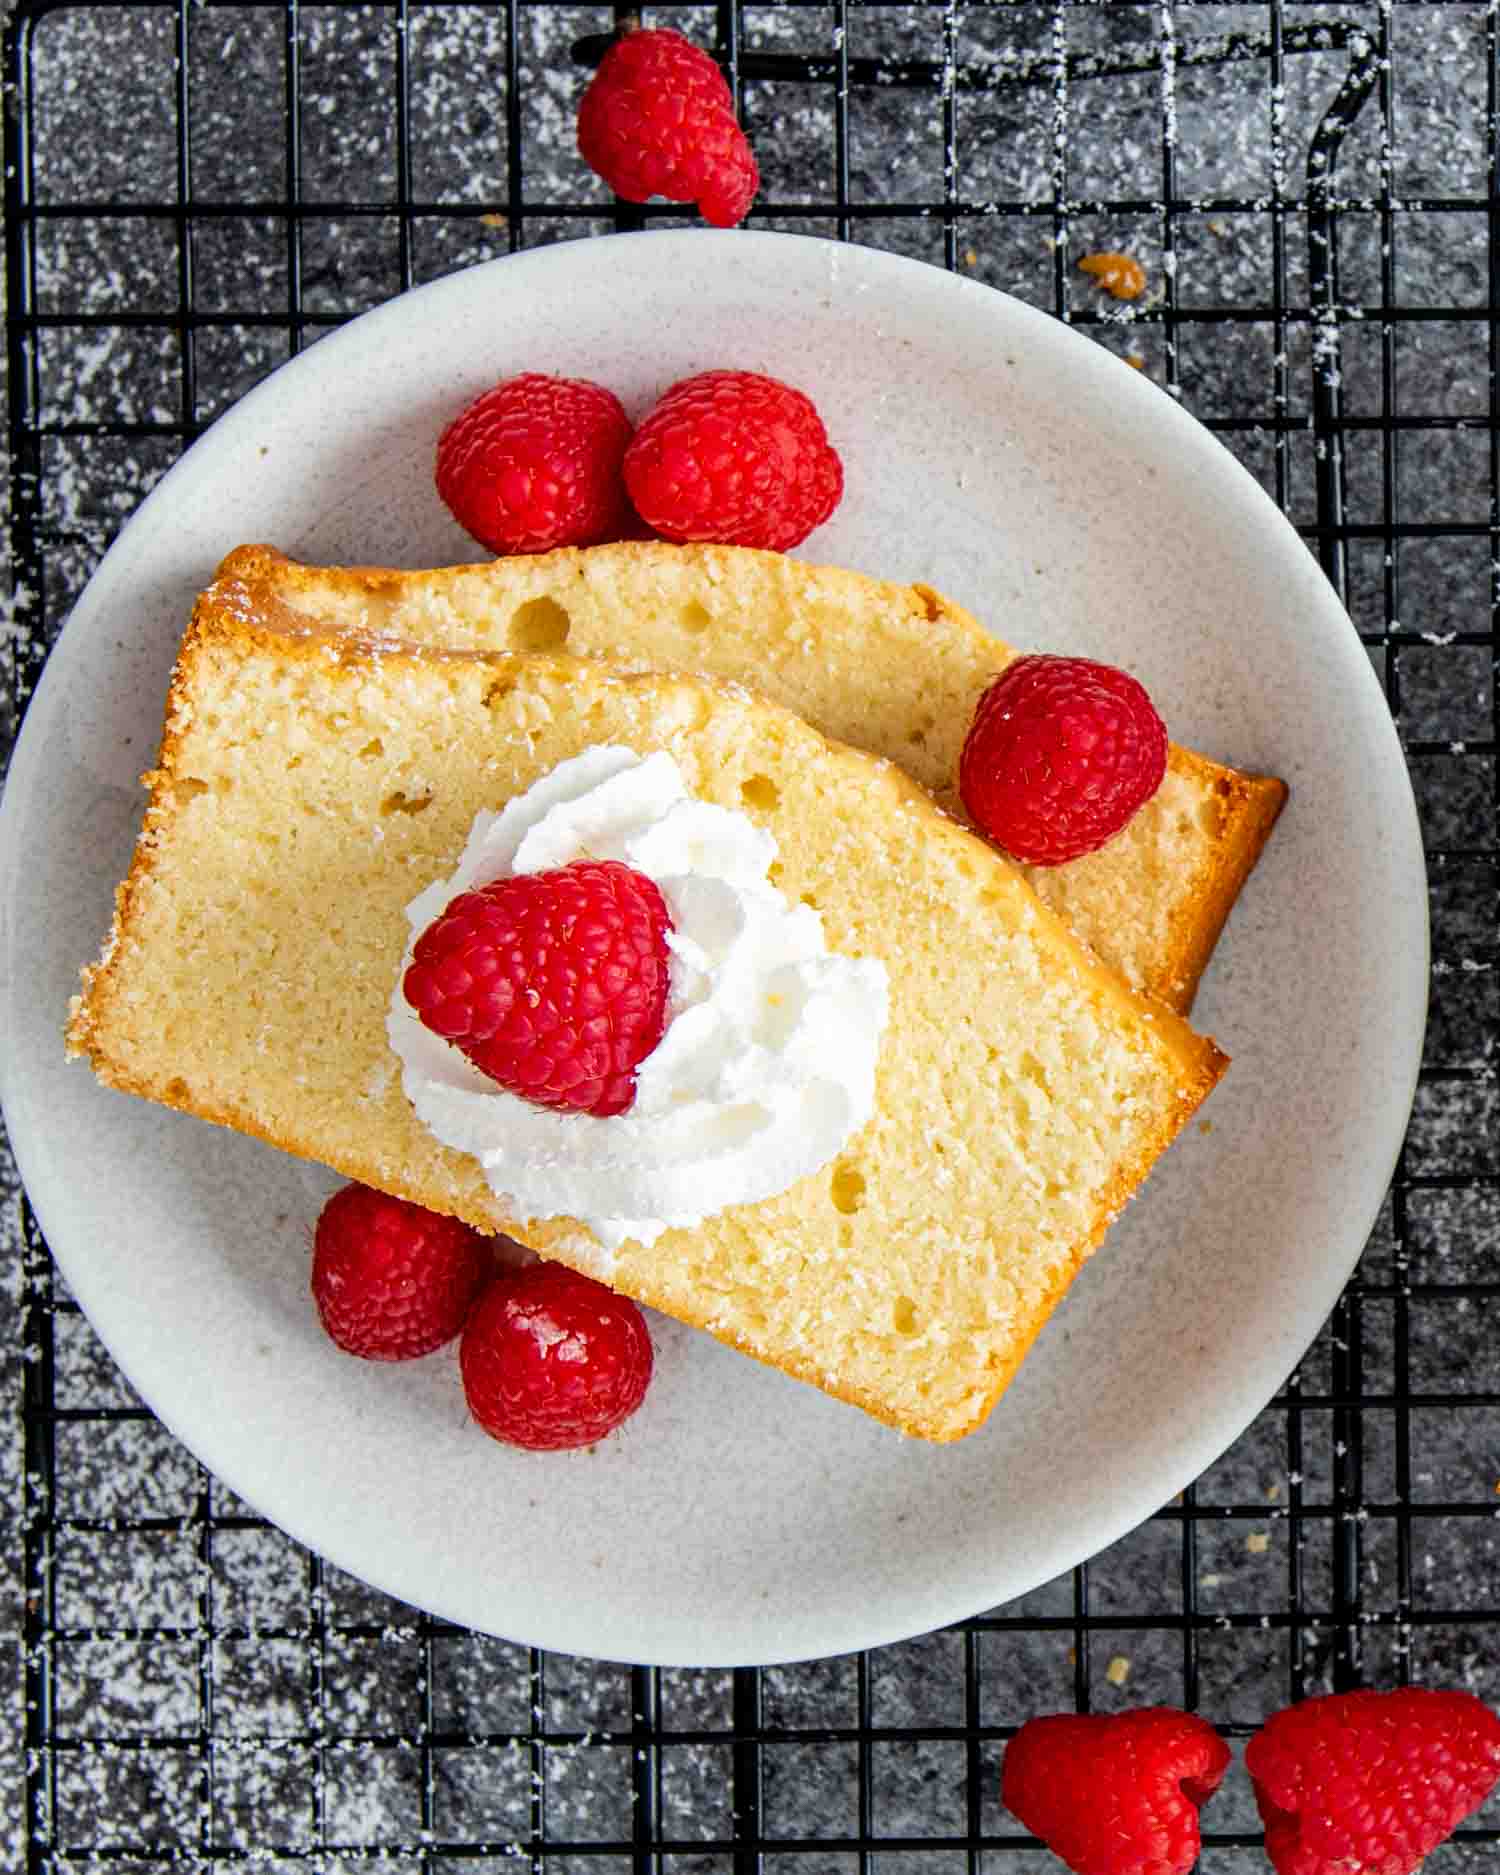 a couple slices of condensed milk pound cake on a dessert plate garnished with raspberries.